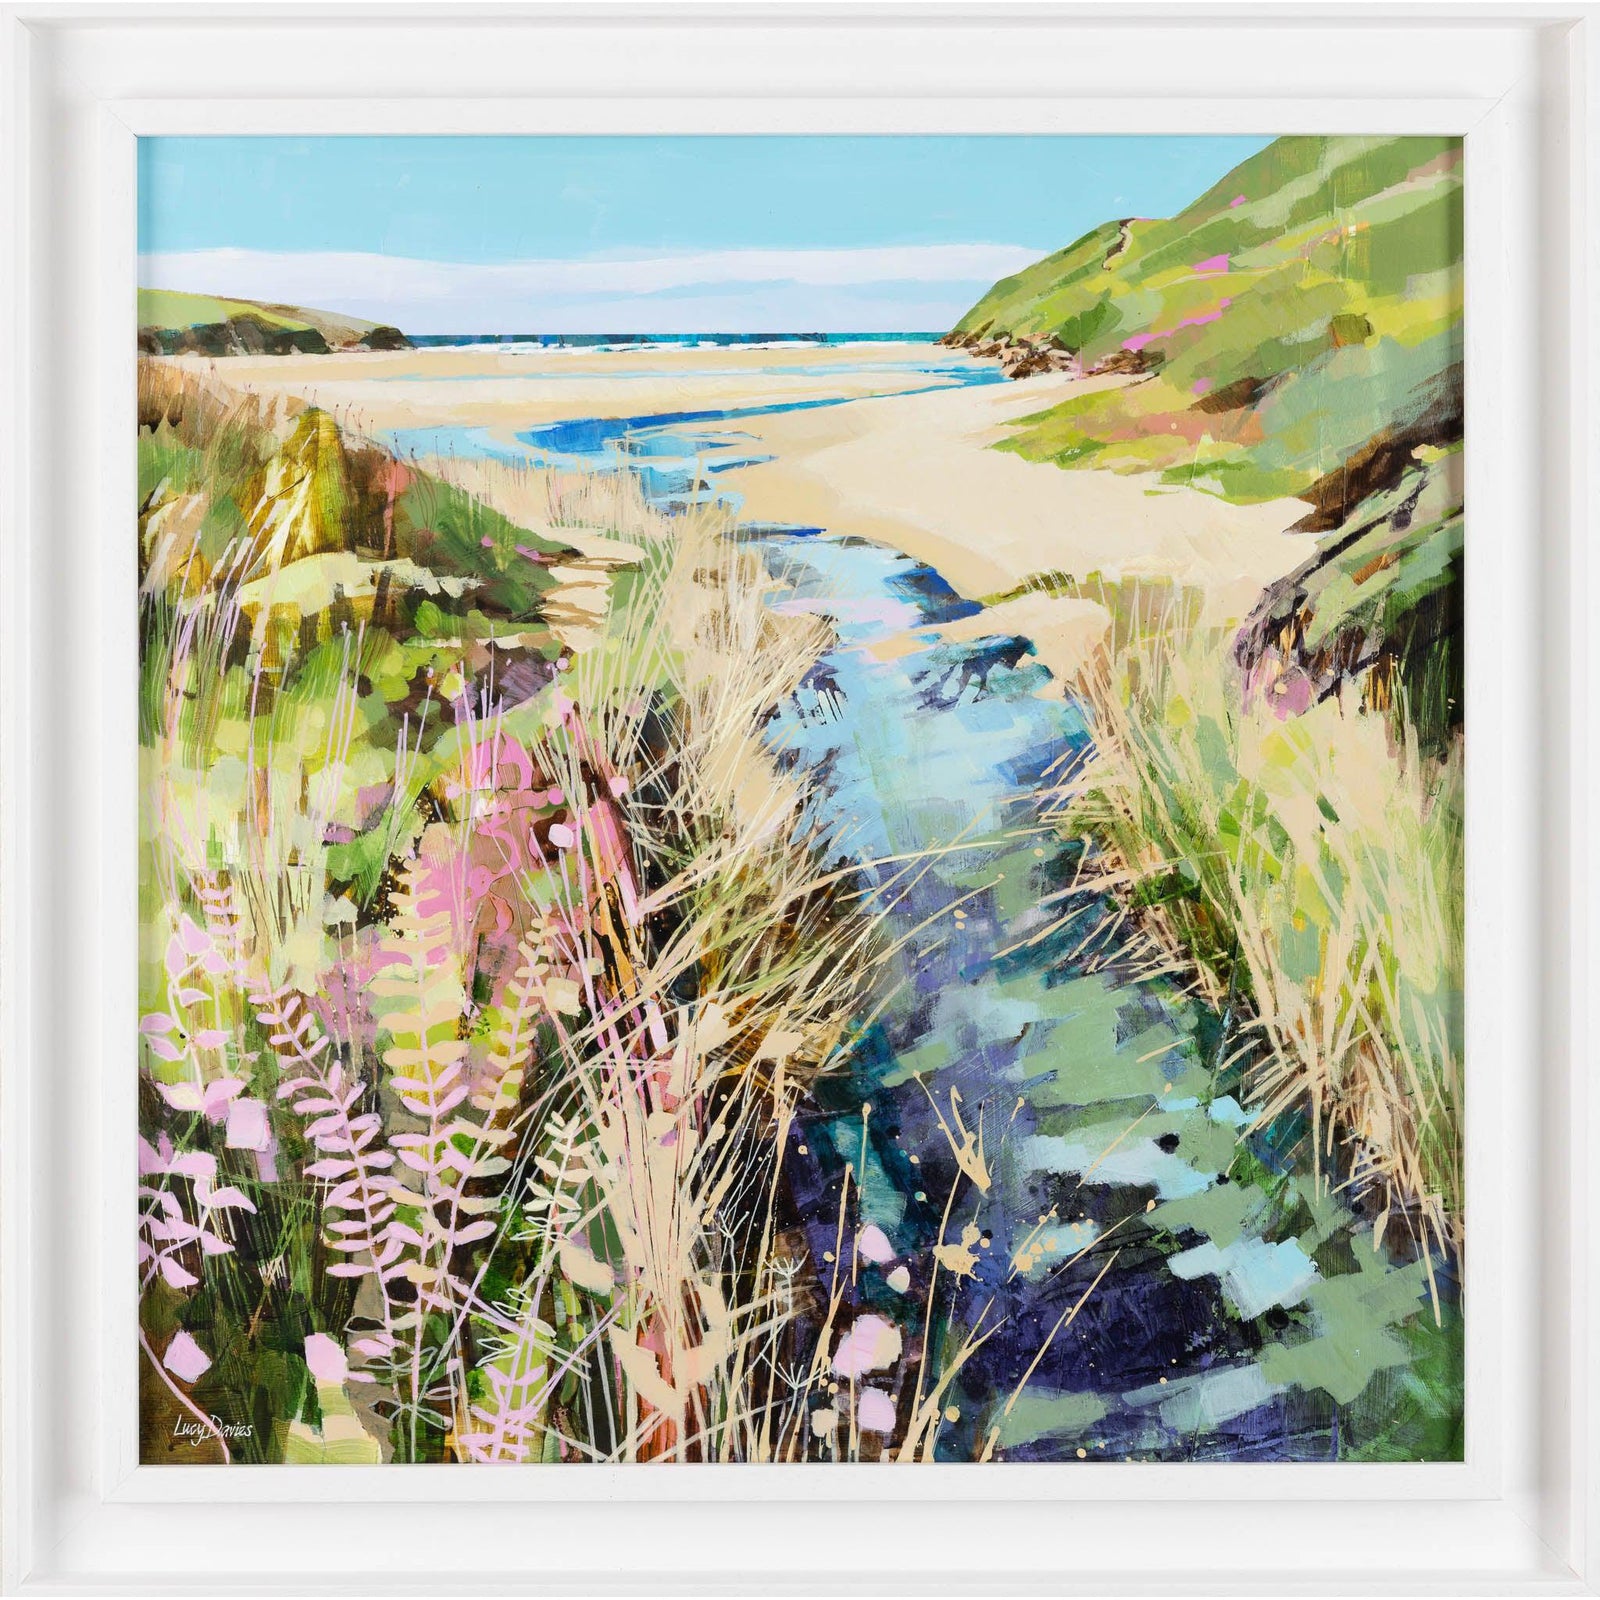 The River at Porthcothan mixed media by Lucy Davies fine art, available at Padstow Gallery, Cornwall